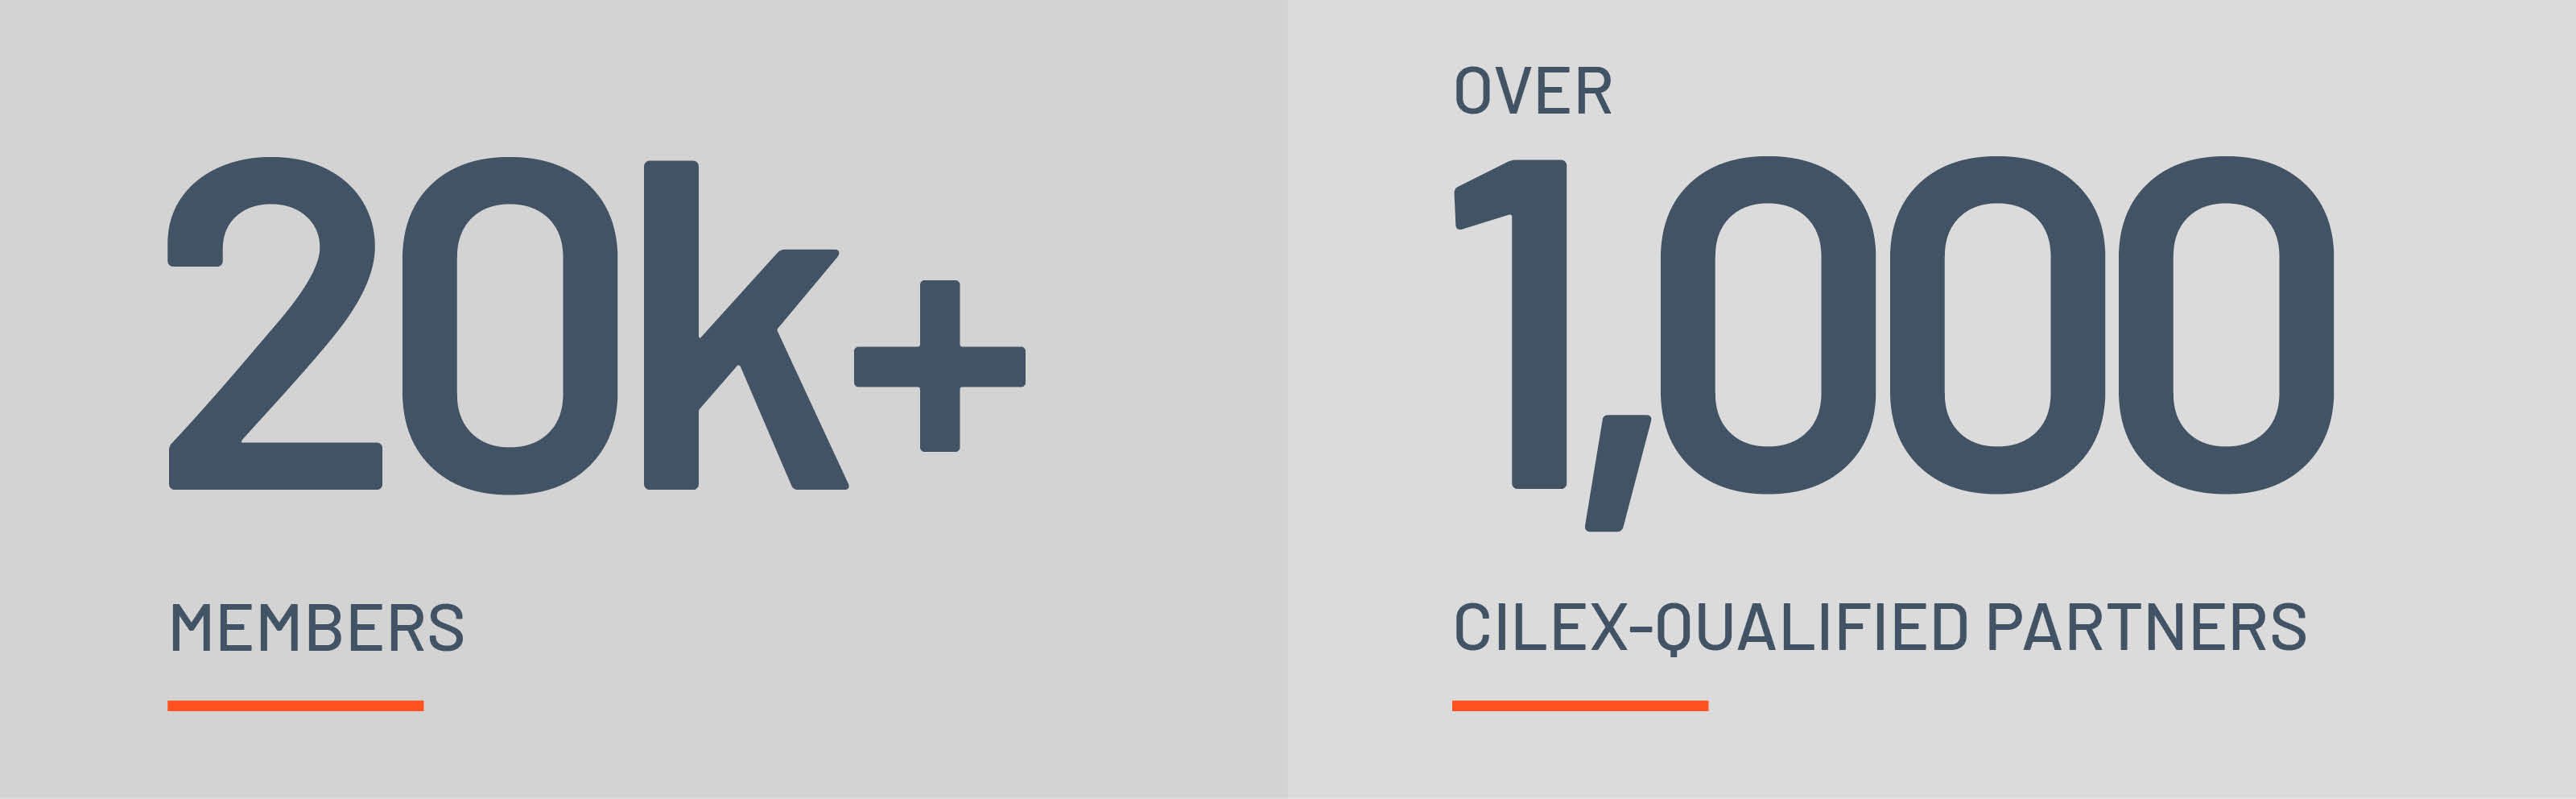 Over 20,000 Members. Over 1000 CILEX-qualified partners.